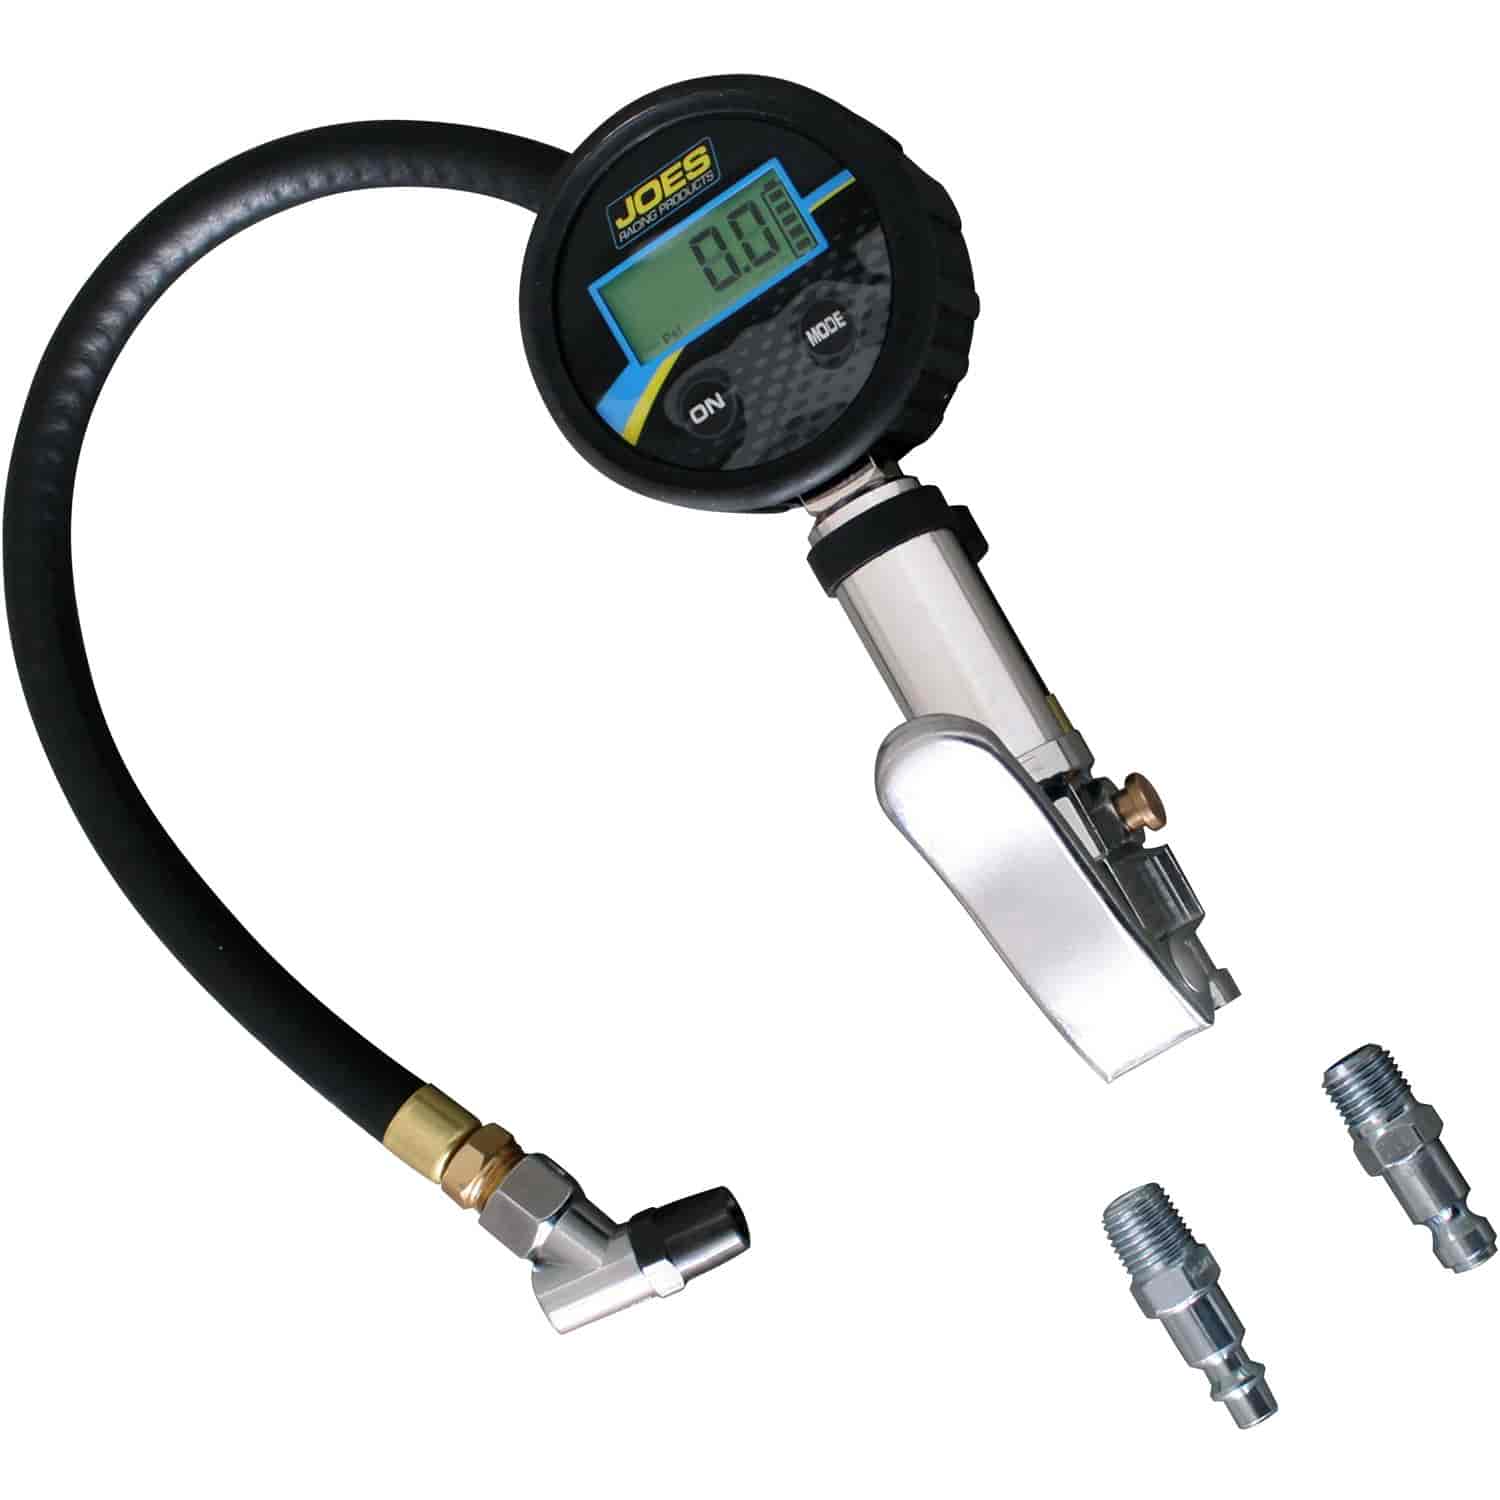 Quick Fill Tire Inflator Includes 60 PSI Digital